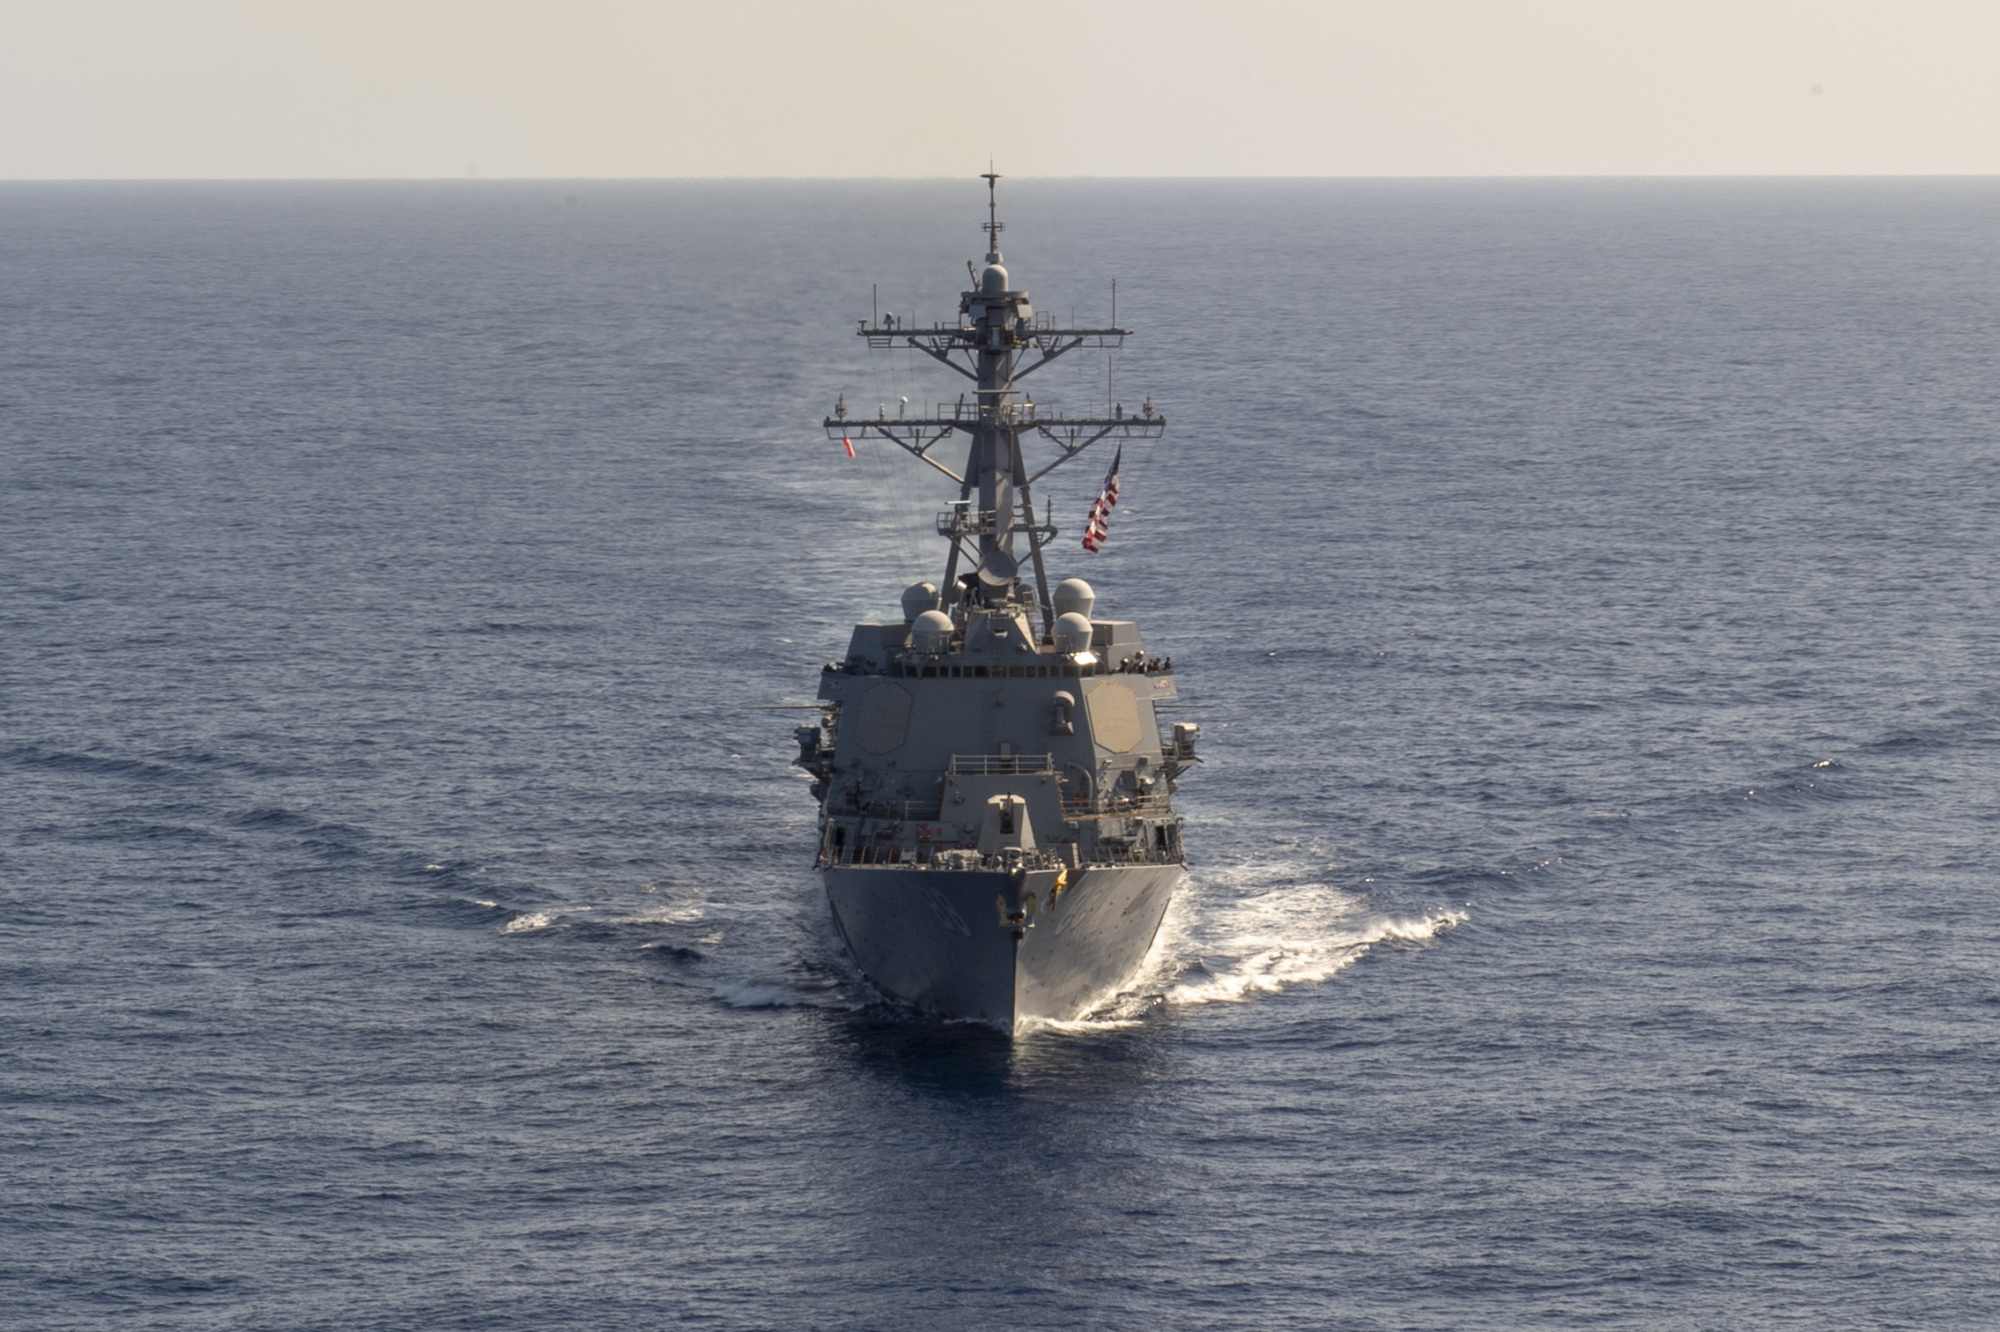 The guided-missile destroyer USS Preble steams through the Philippine Sea on April 18. | COMMANDER, TASK FORCE 70 / CARRIER STRIKE GROUP 5